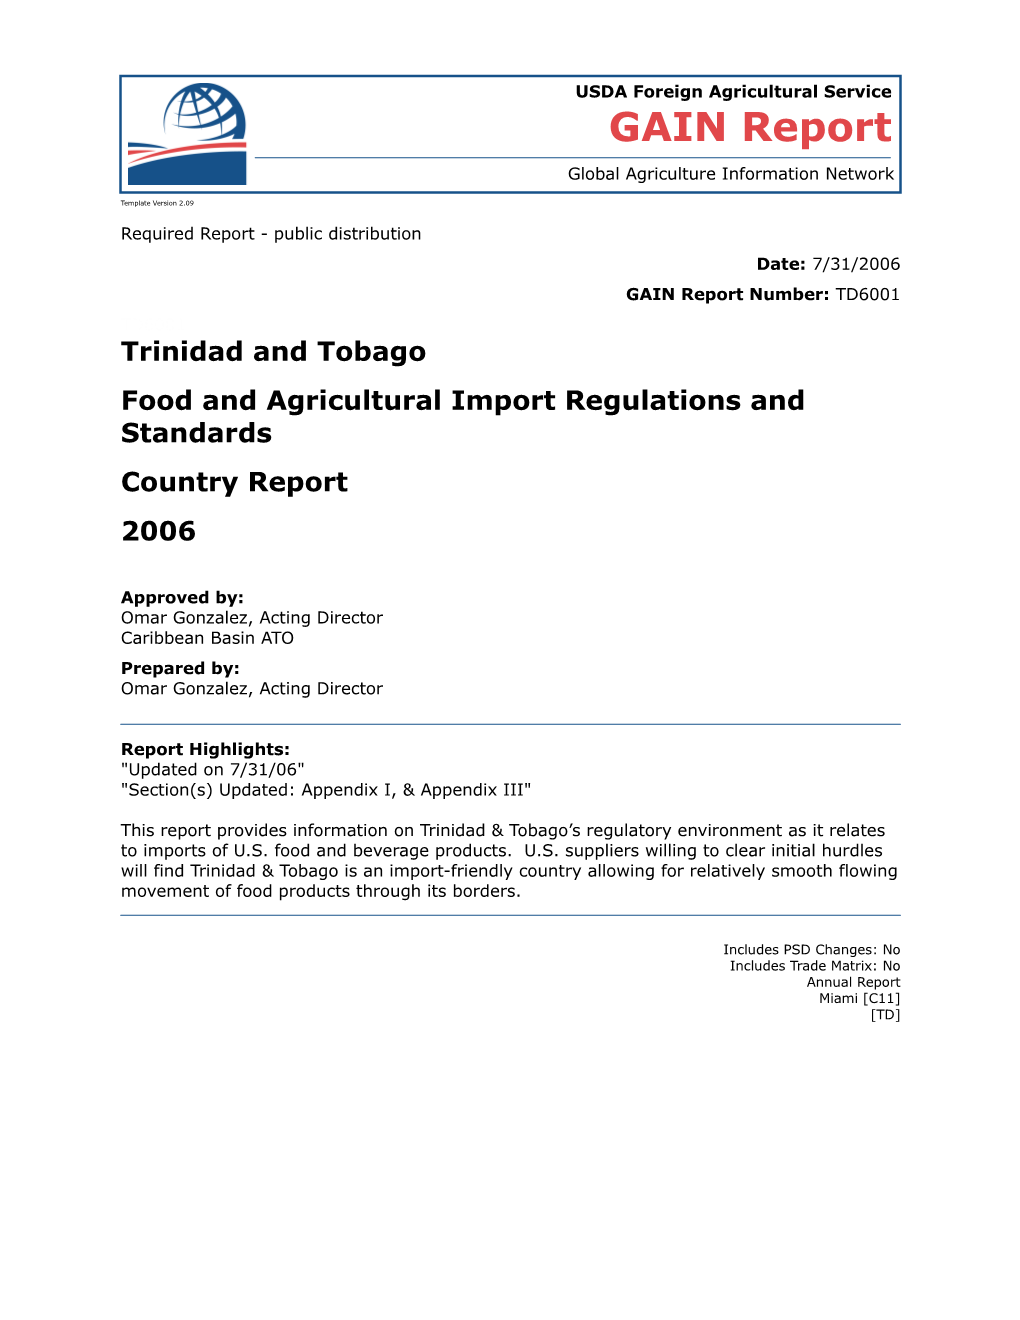 Food and Agricultural Import Regulations and Standards s8